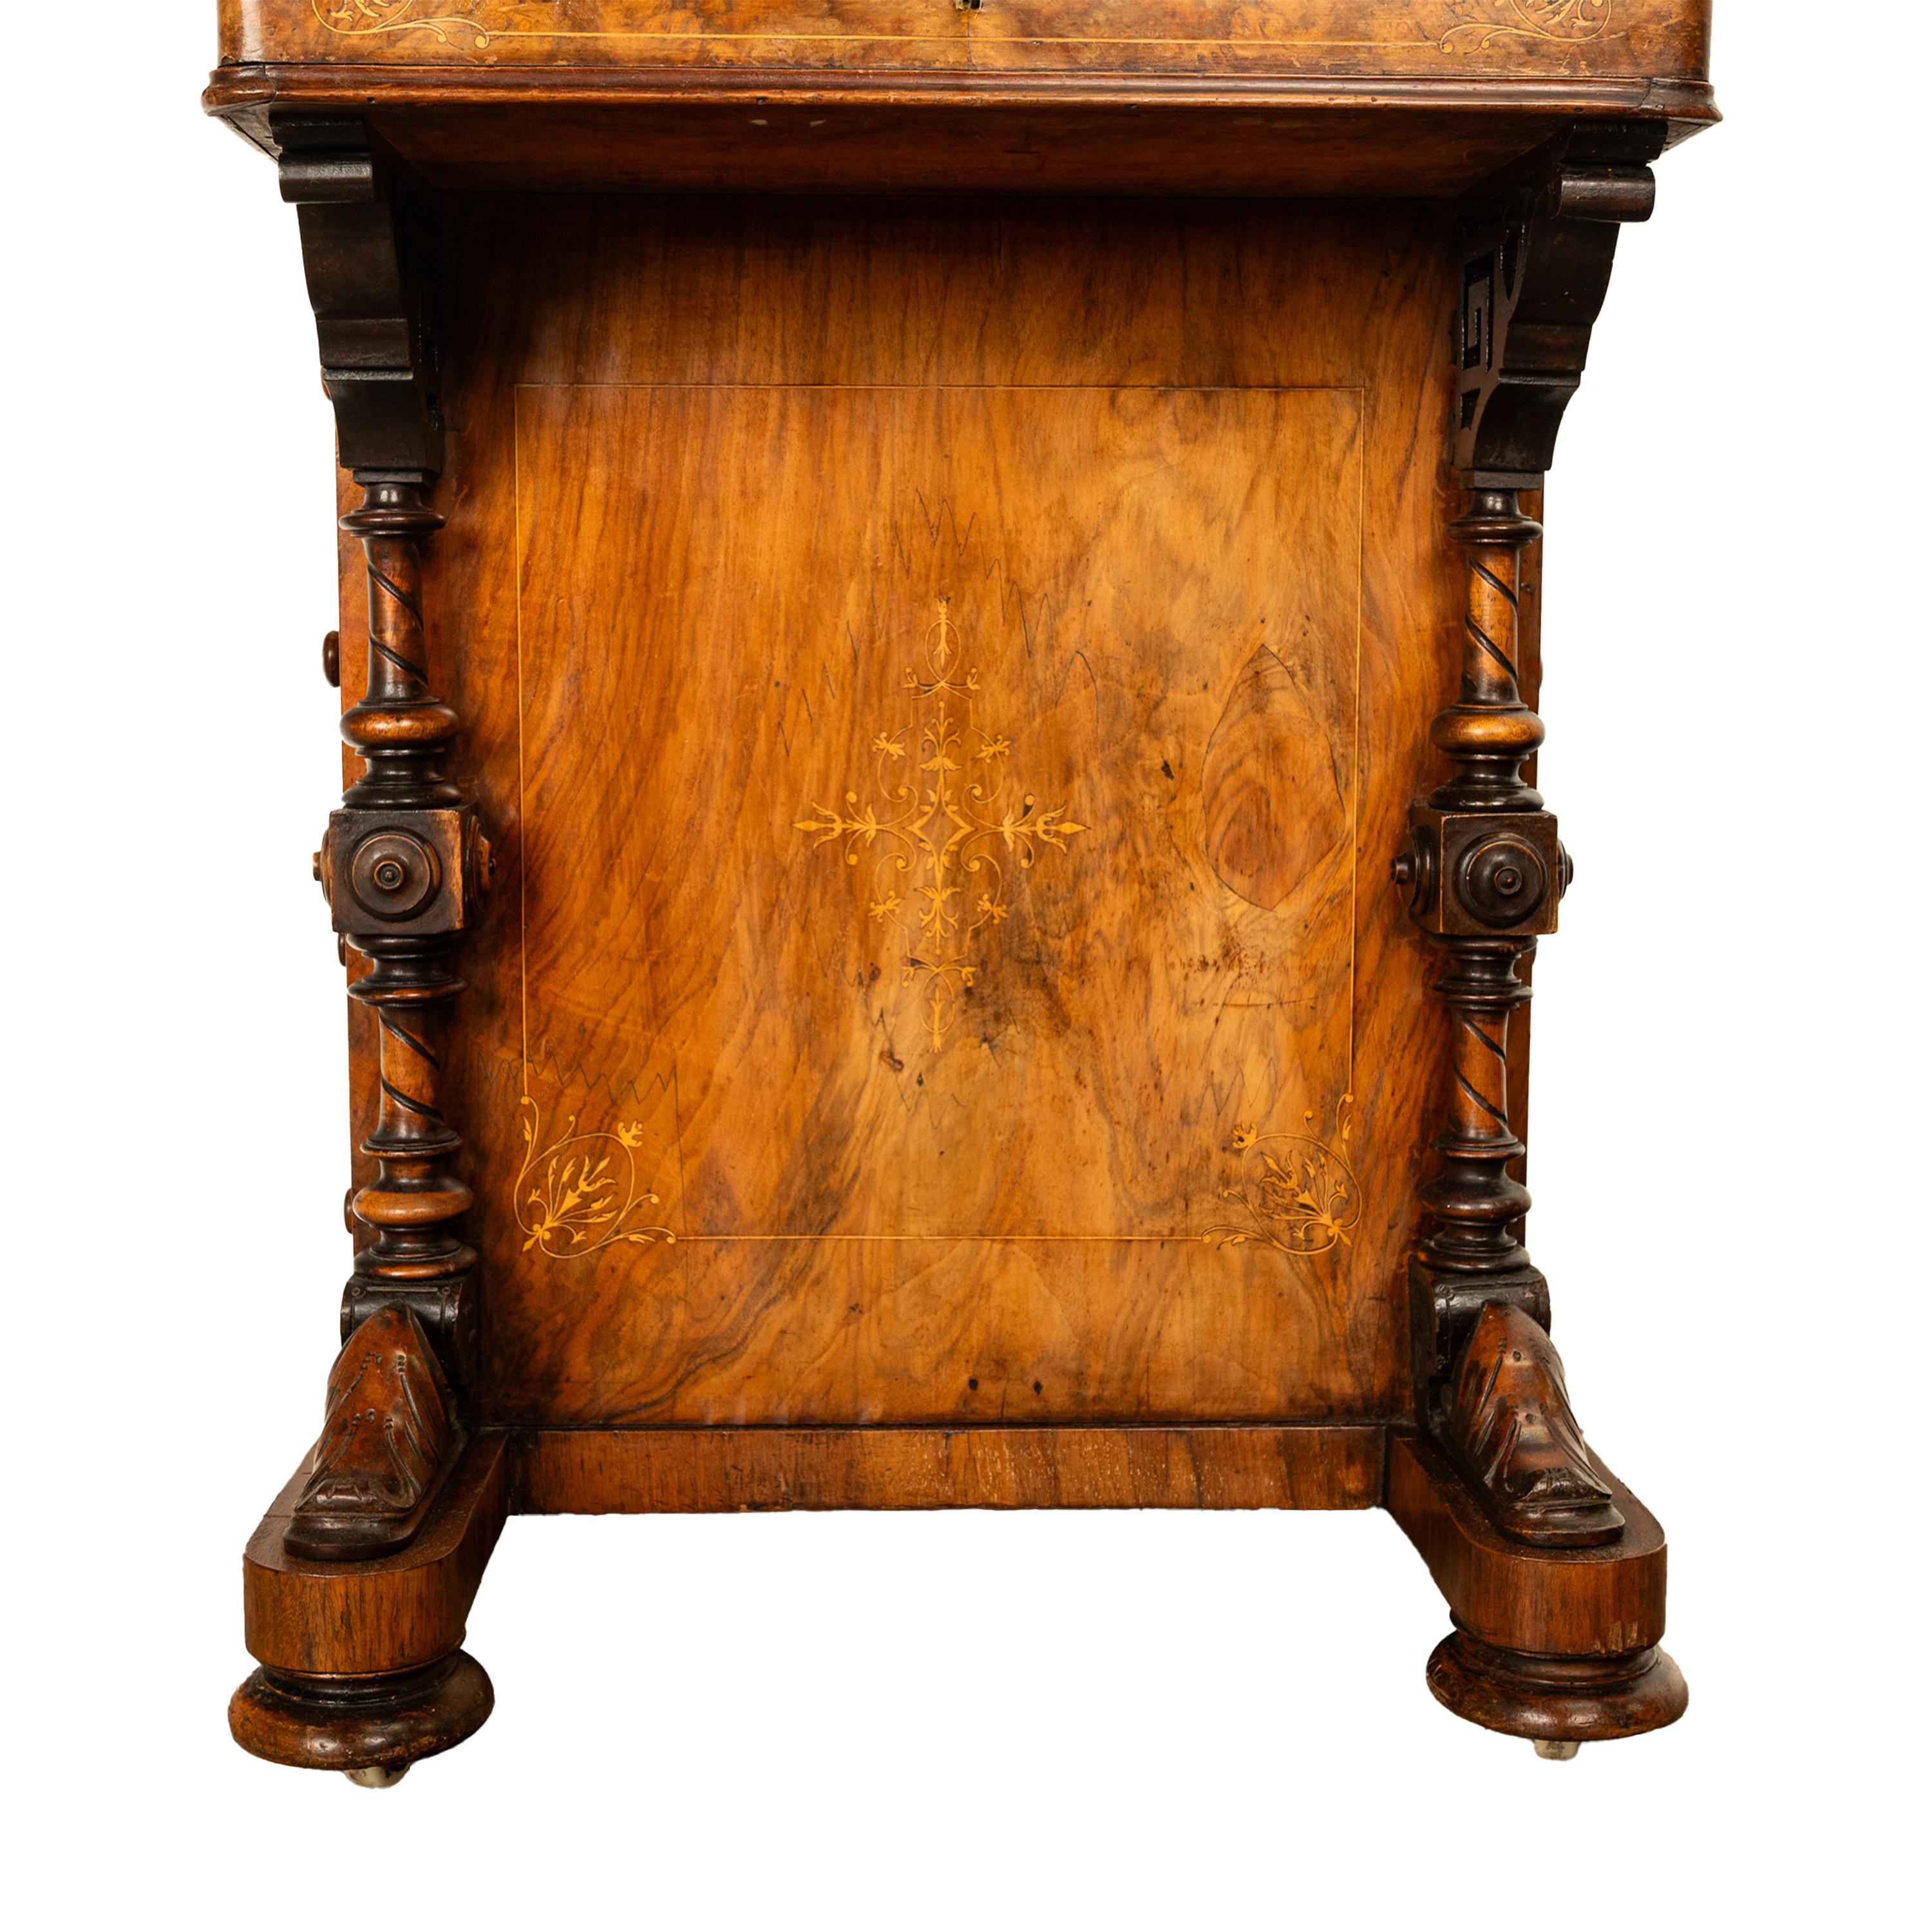 Antique Victorian Burl Walnut Inlaid Marquetry Carved Davenport Desk 1860 For Sale 12